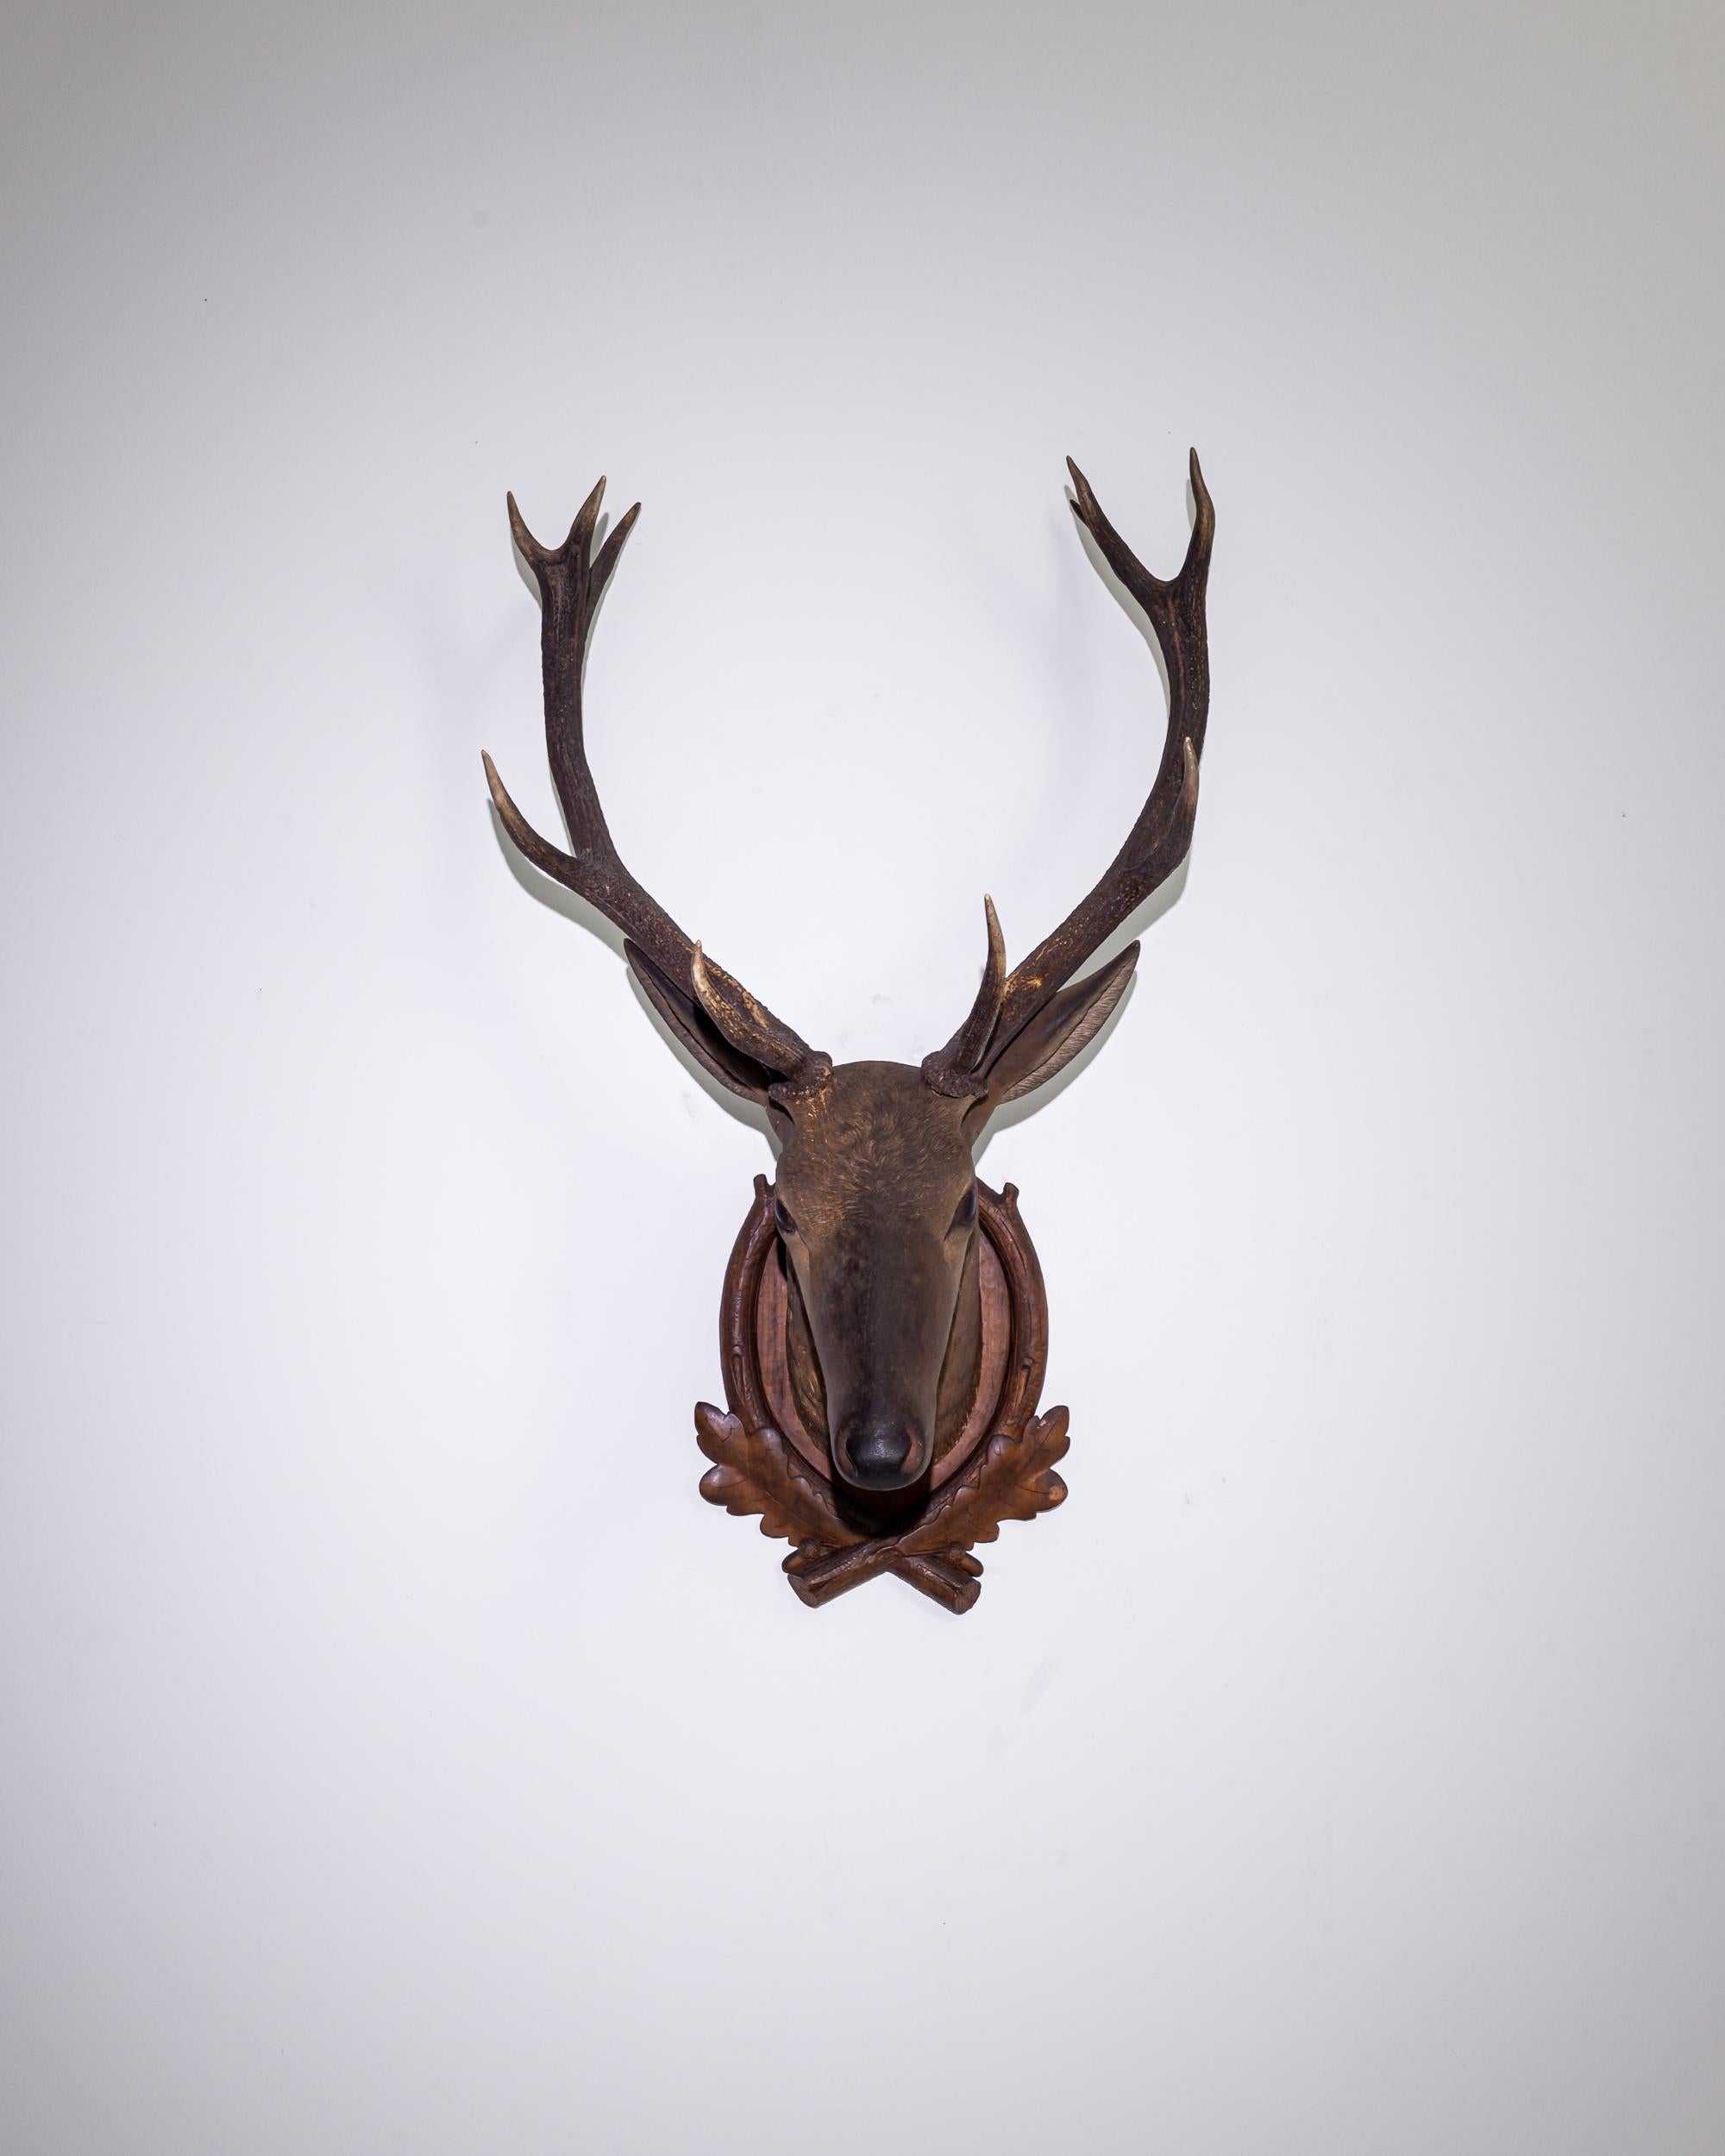 This wooden stag’s head decoration evokes the rustic backdrop of a mountain hunting lodge. Made in Czechia in the 20th century, a pair of genuine antlers are mounted atop a carved wooden stag’s head. The dark finish of the wooden frame lends the